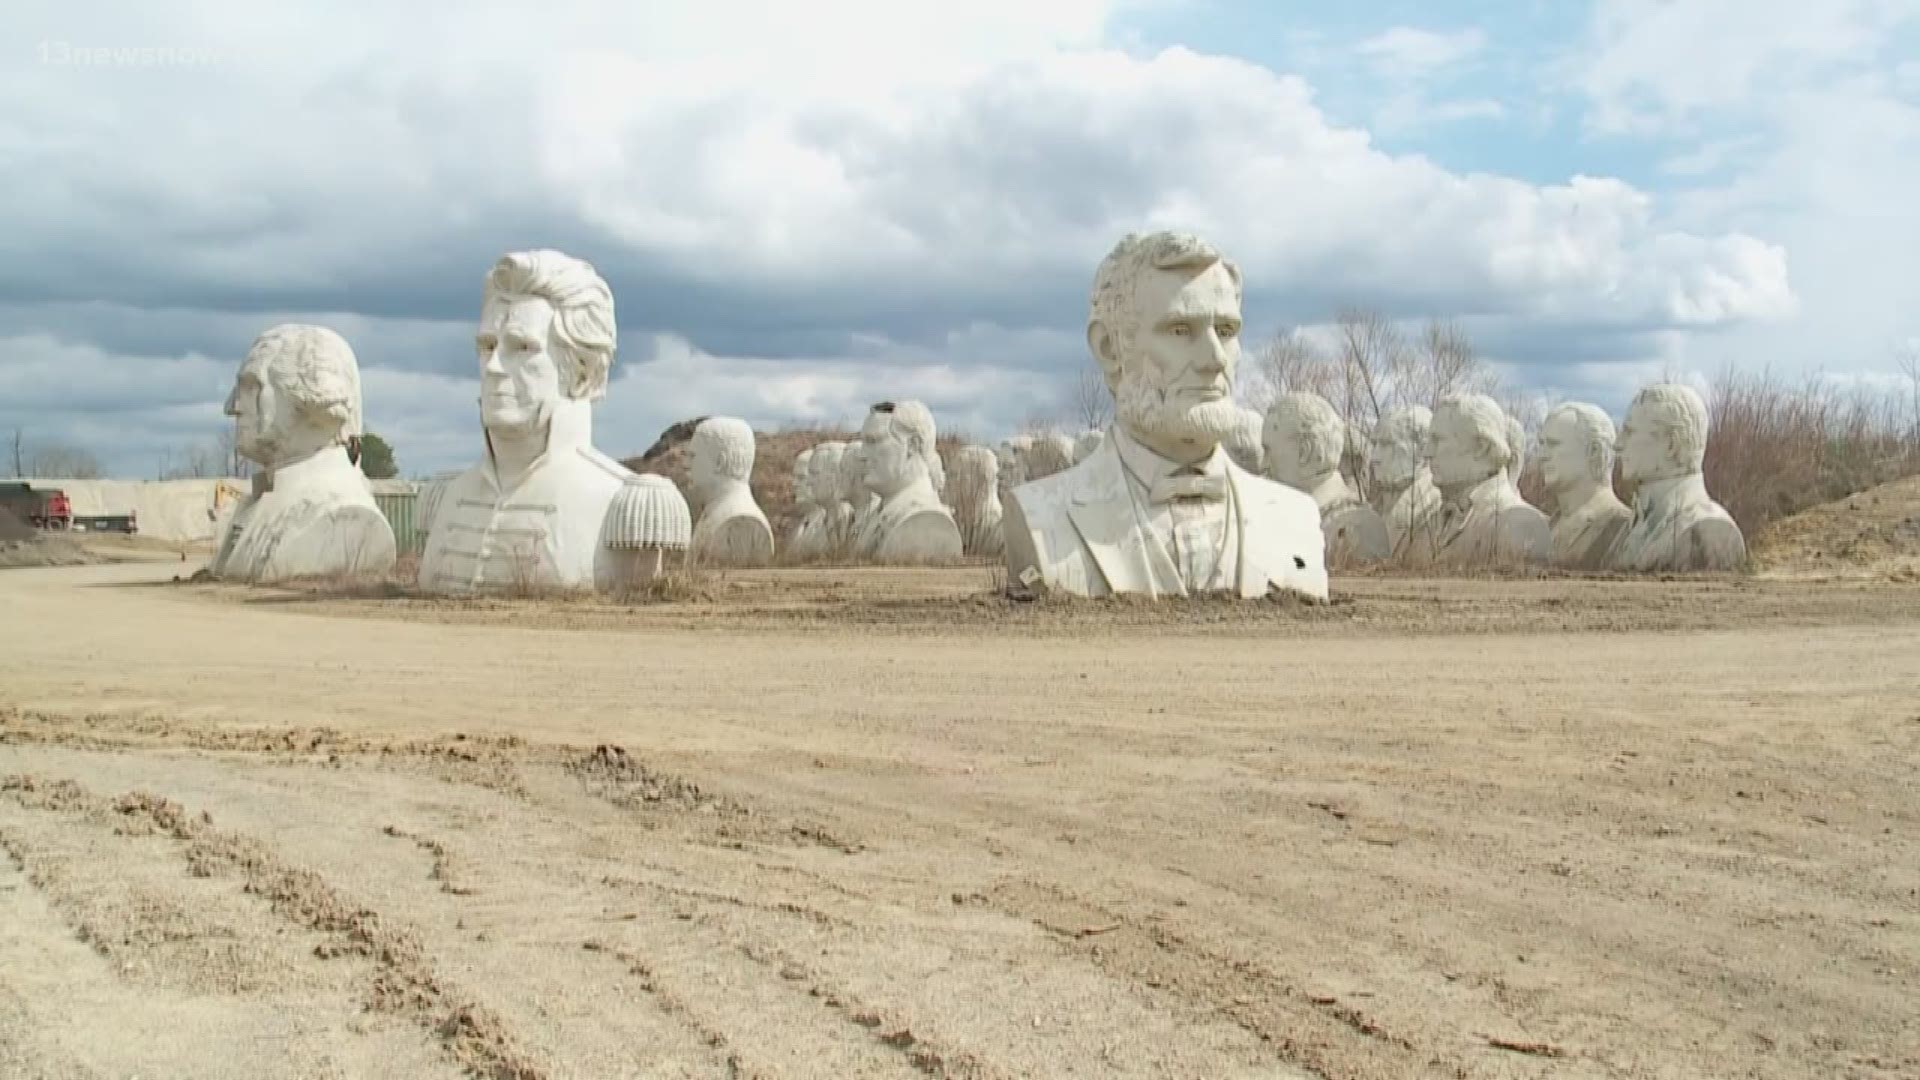 Large presidential busts once stood at a park in Williamsburg, but recently they've been crumbling in field. The owner said they might be heading to a new location for people to enjoy again.